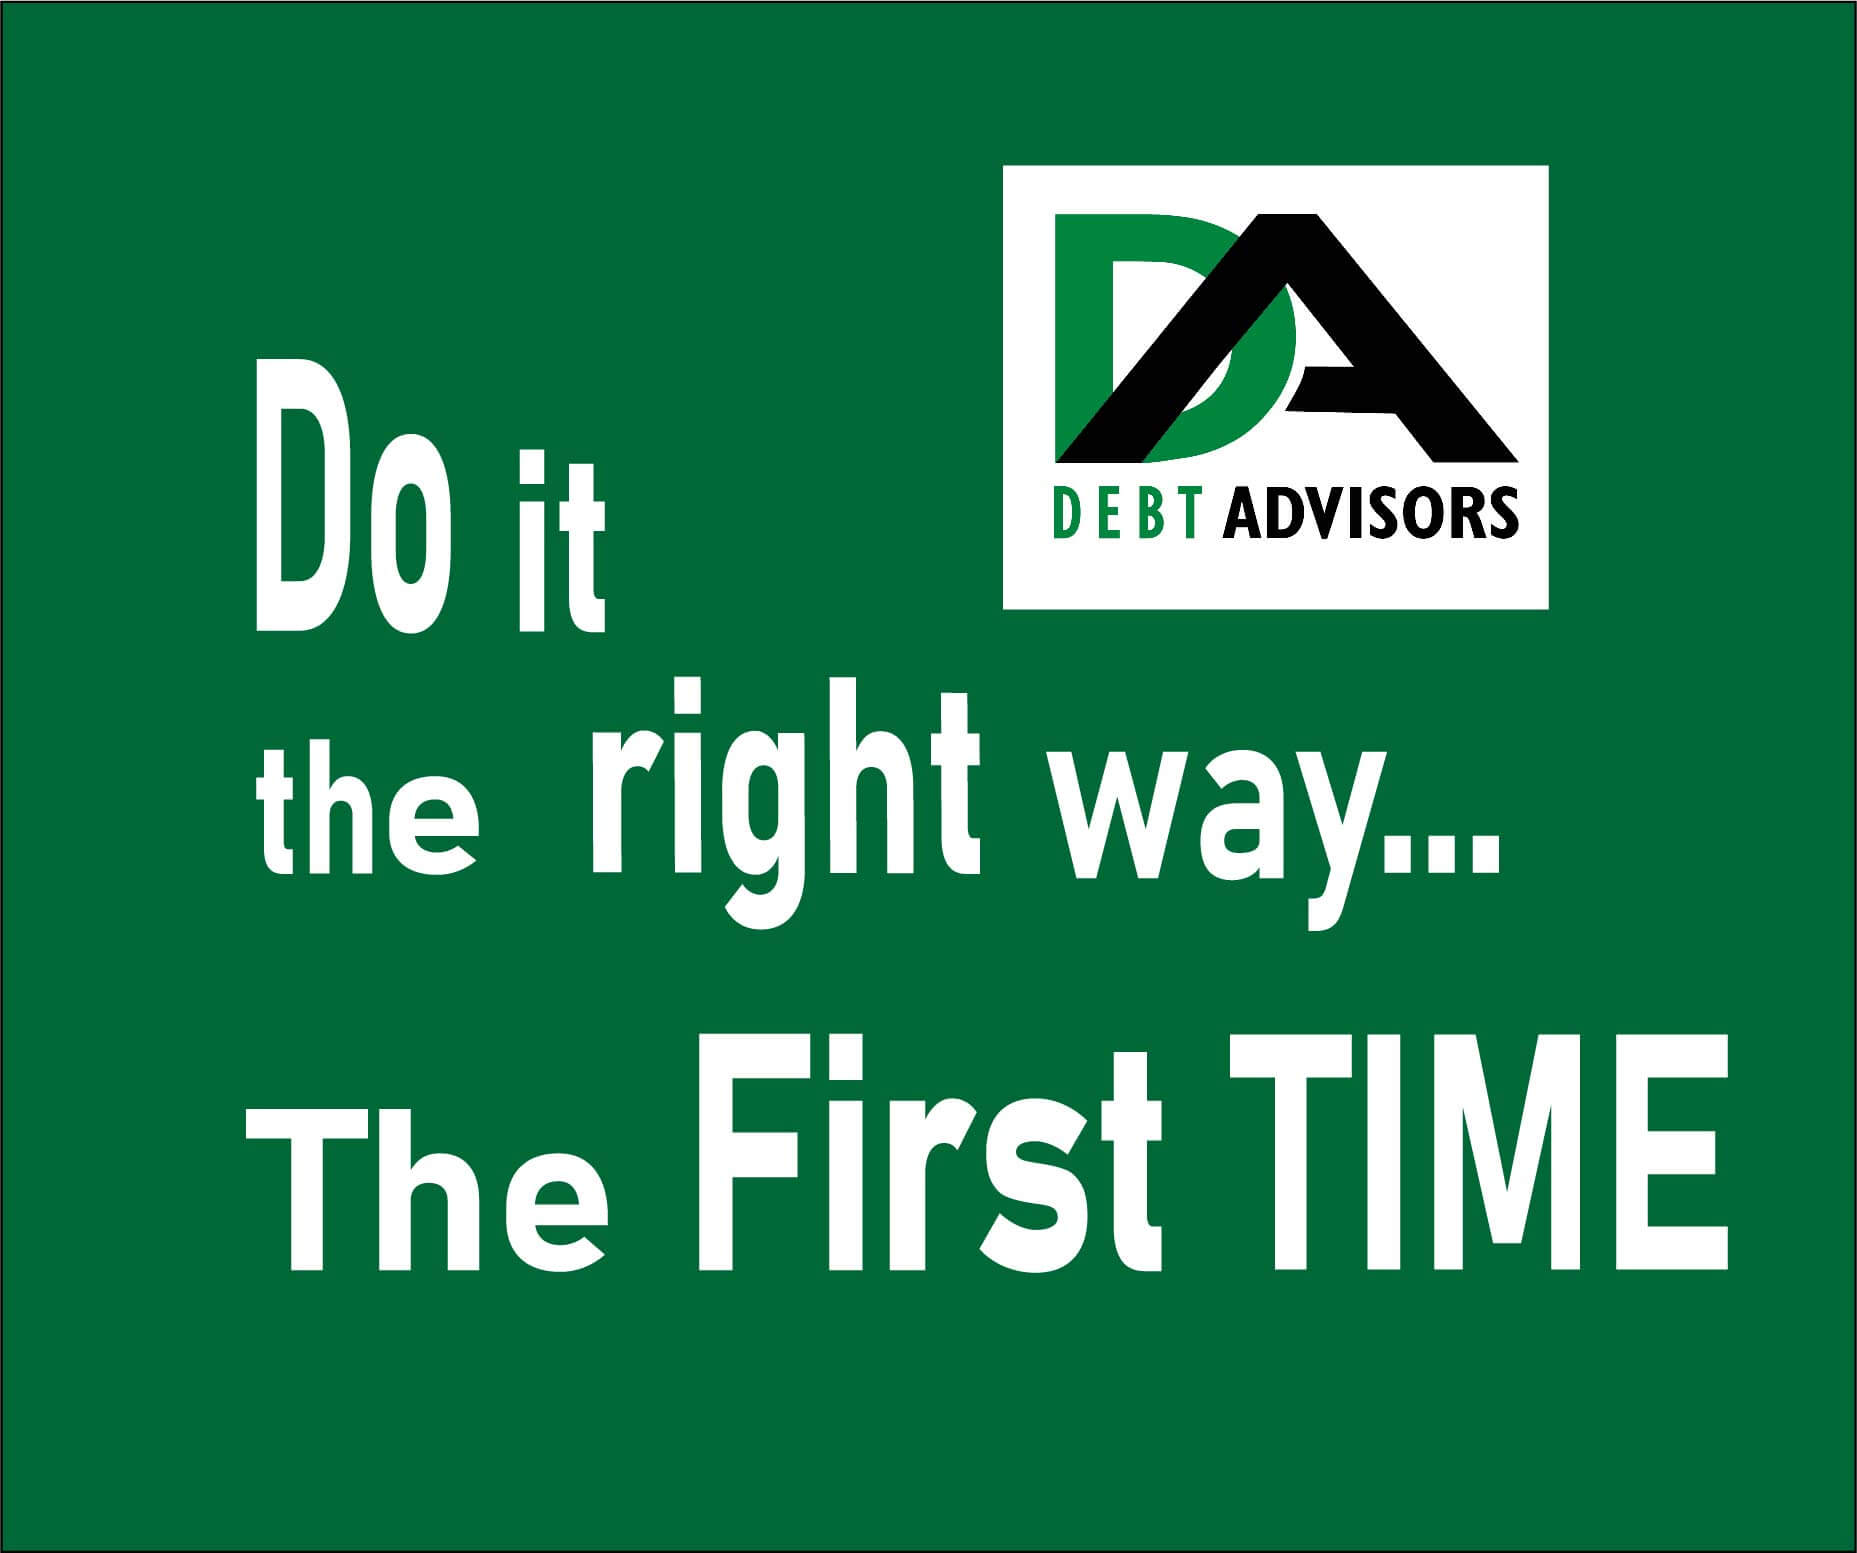 get out of debt once and for all by hiring a milwaukee bankruptcy attorney at Debt Advisors today